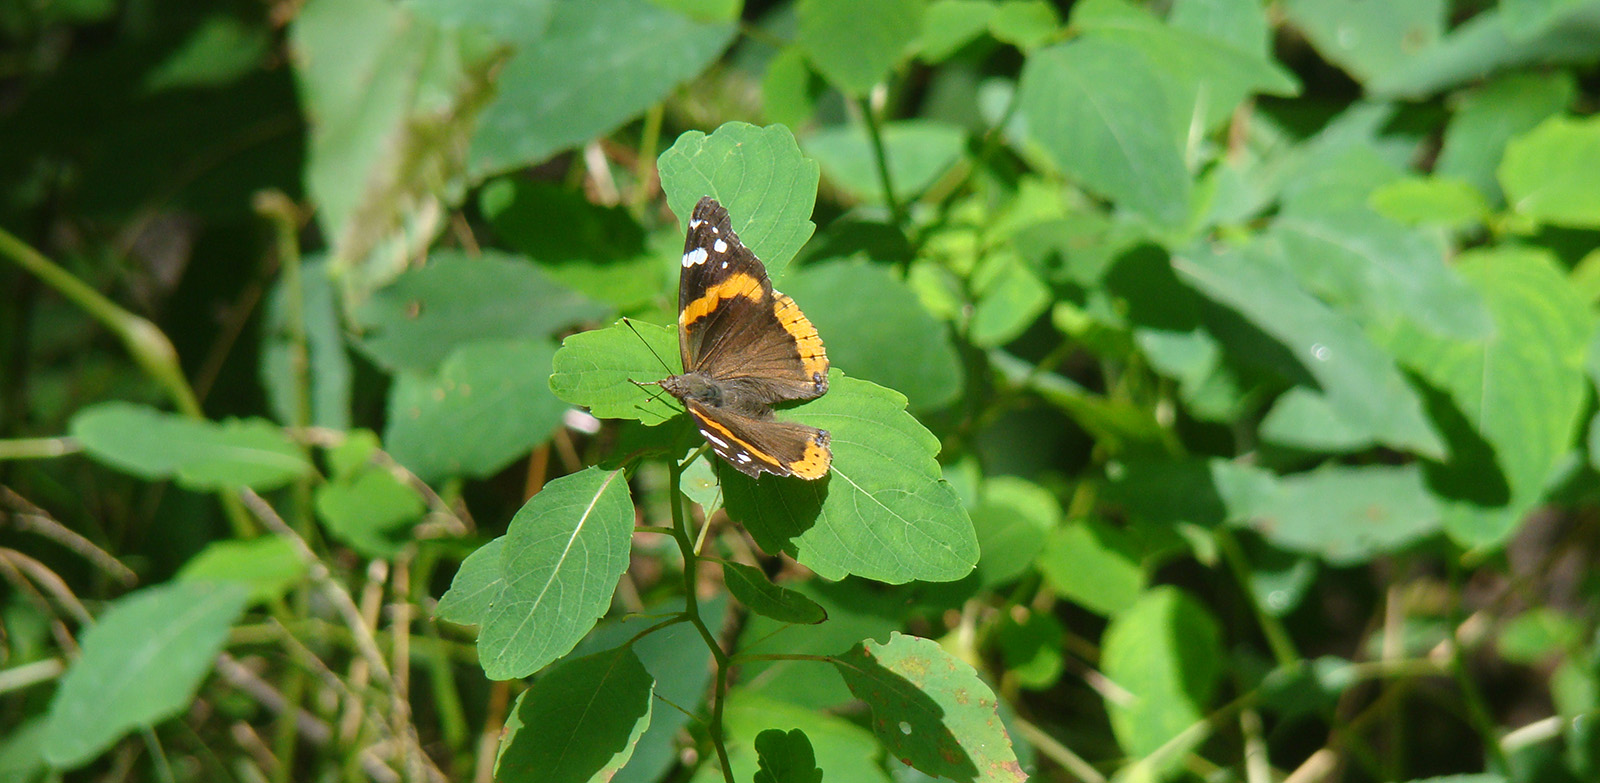 A photo of a brown, orange, and white butterfly sitting on green leaves.